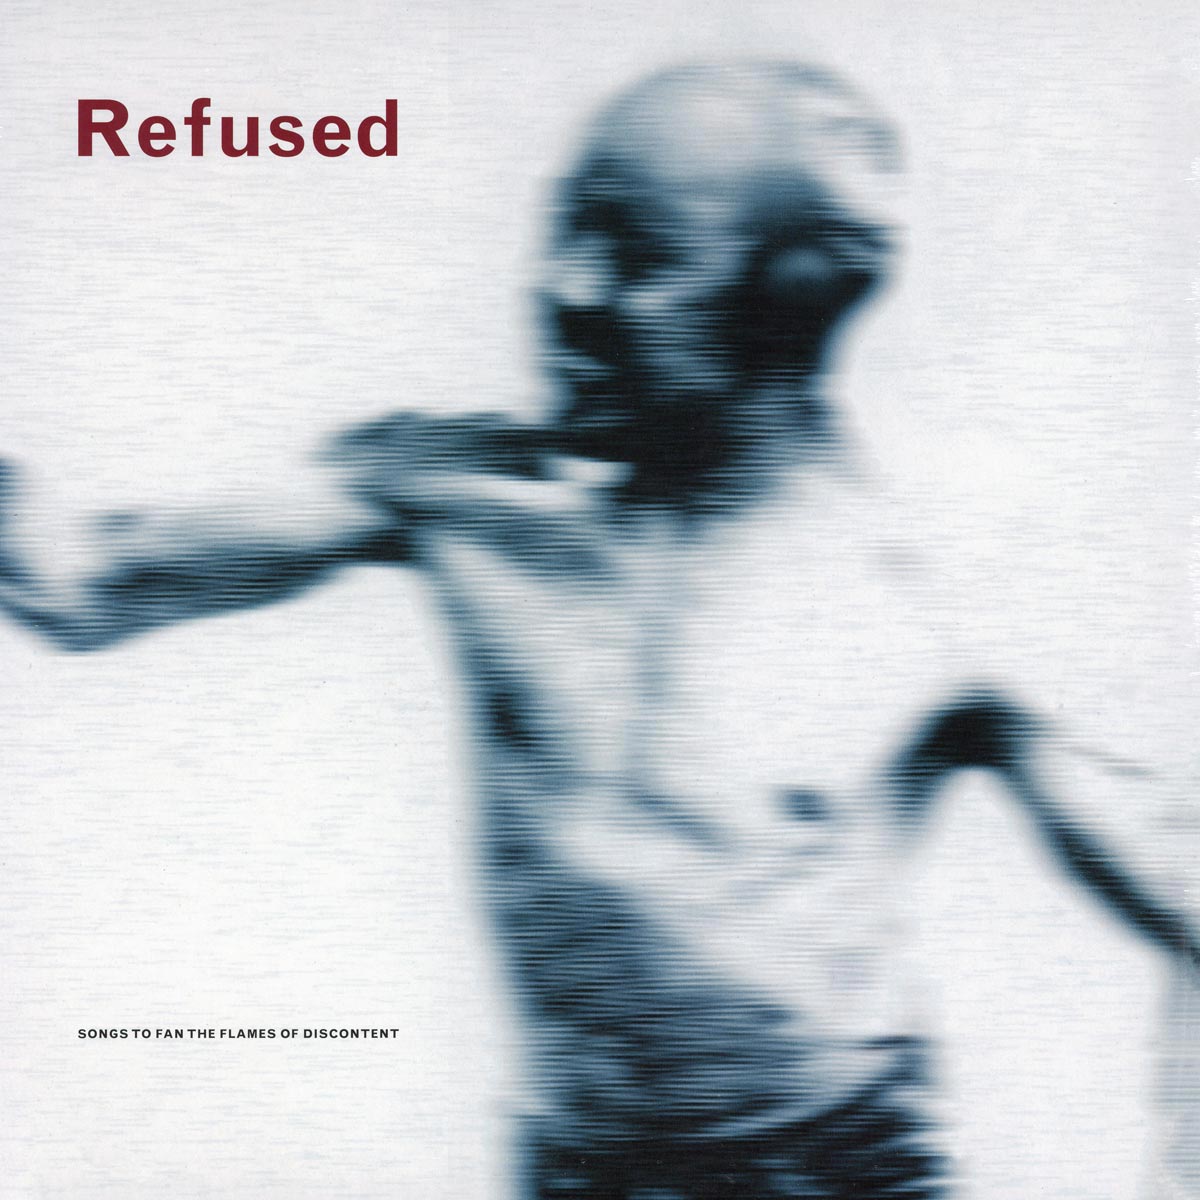 Refused---Songs-to-fan-the-flames-of-discontent-2-lp